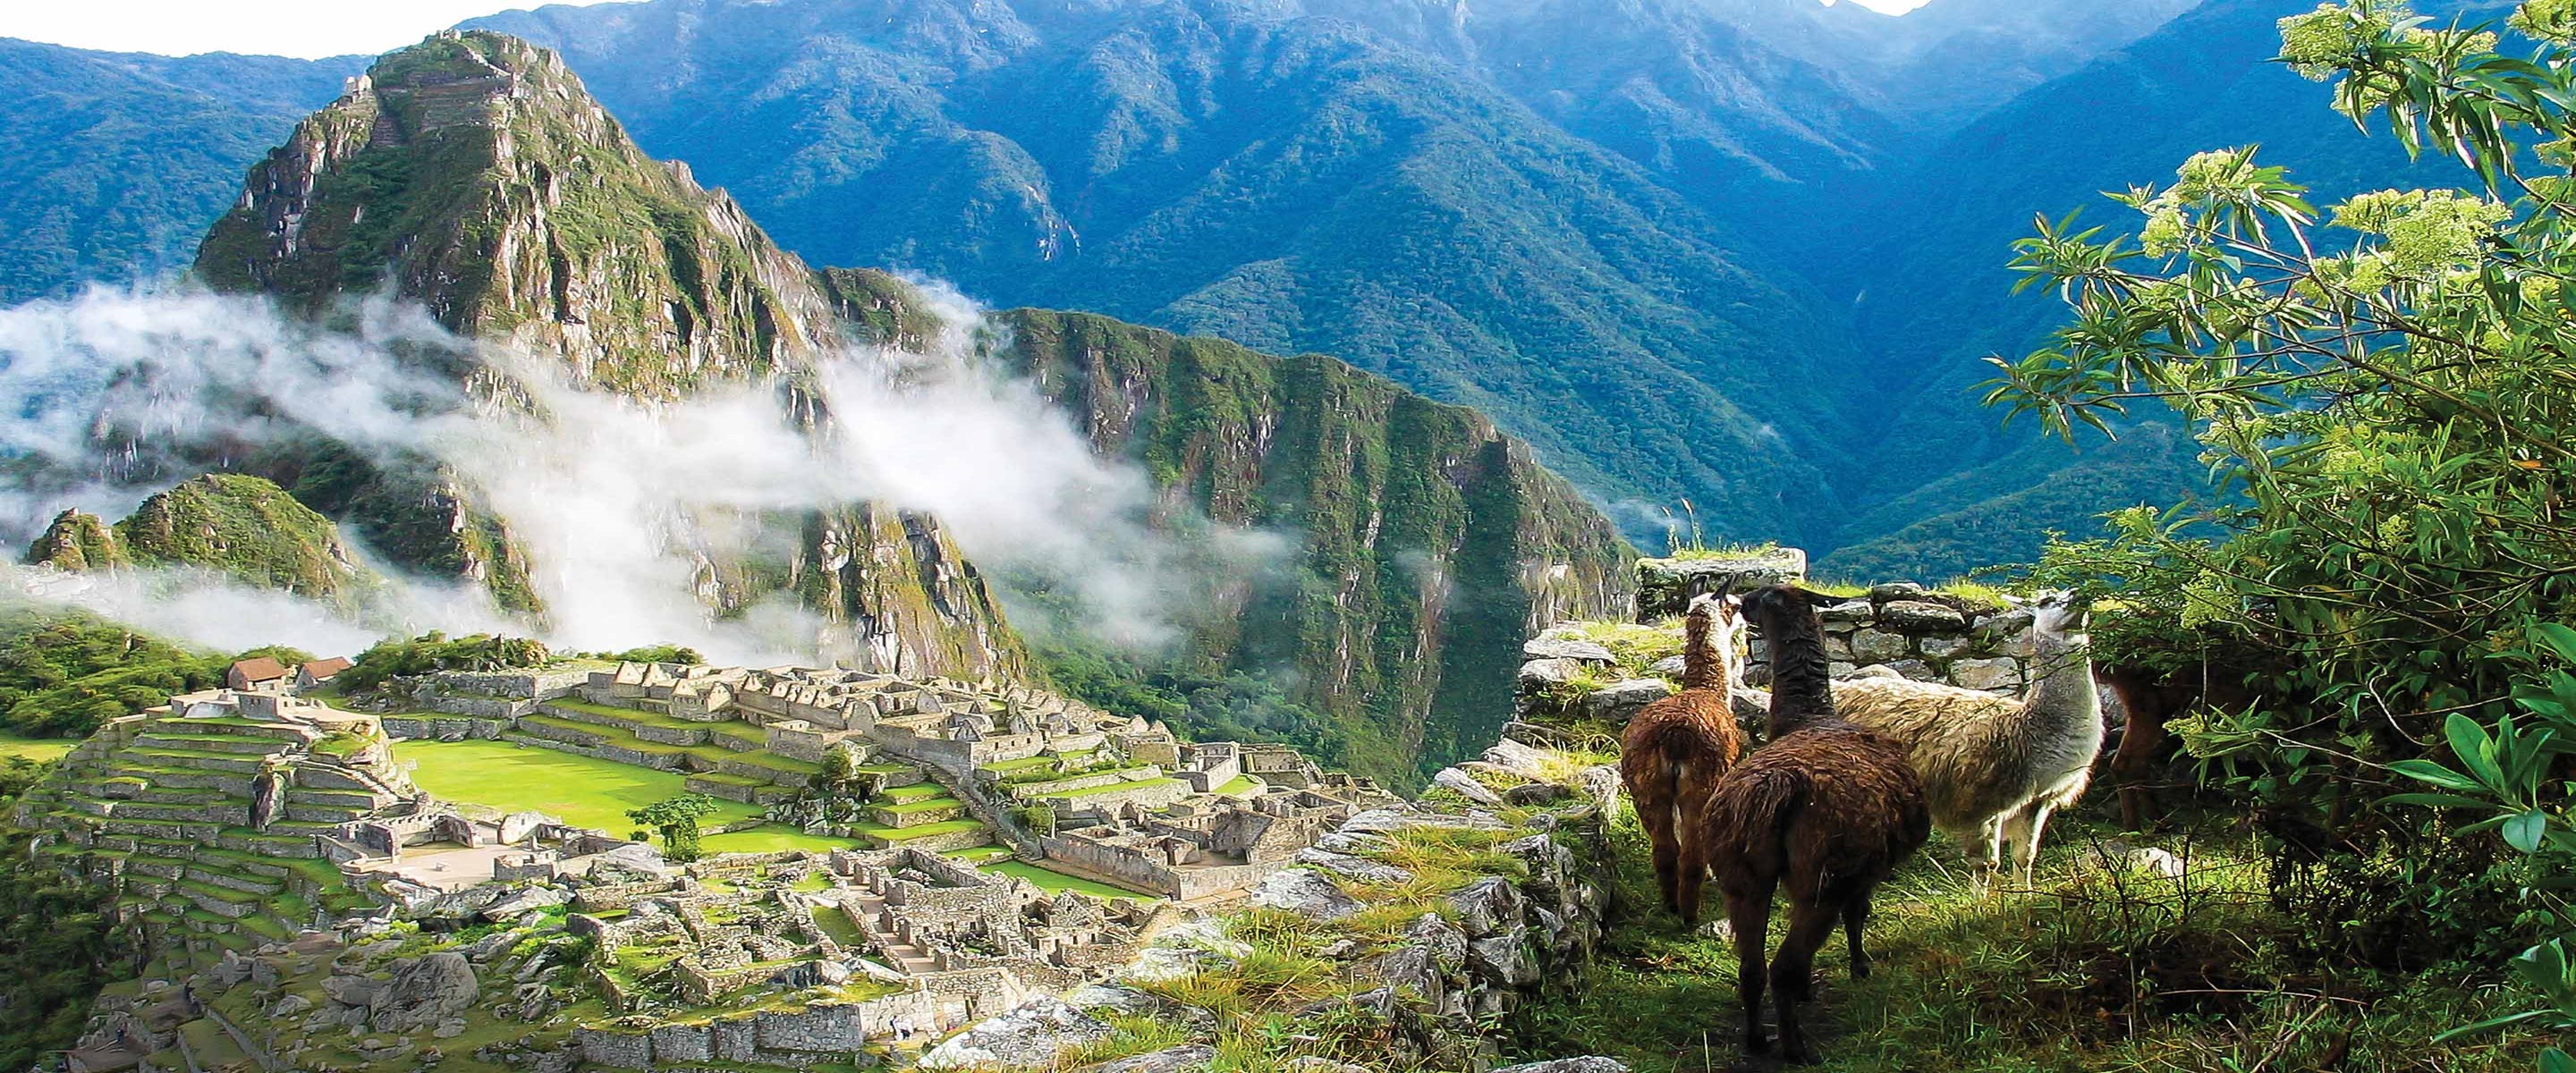 South America Tours & Escorted Tours Tauck